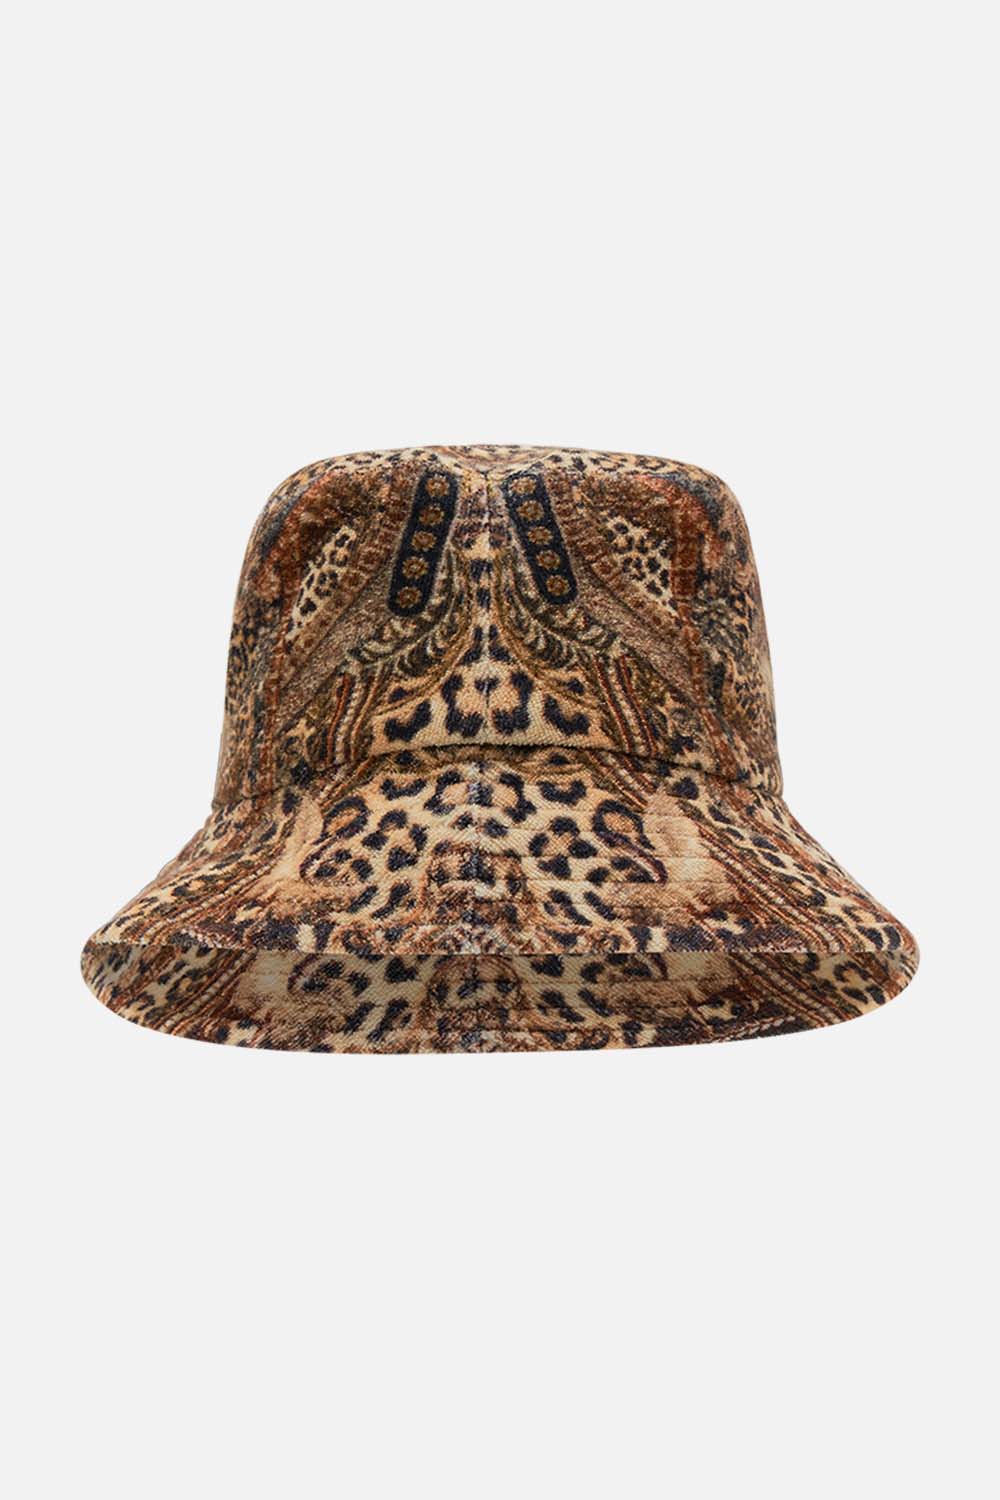 Product view of CAMILLA  lopeard print bucket hat in Standing Ovation print